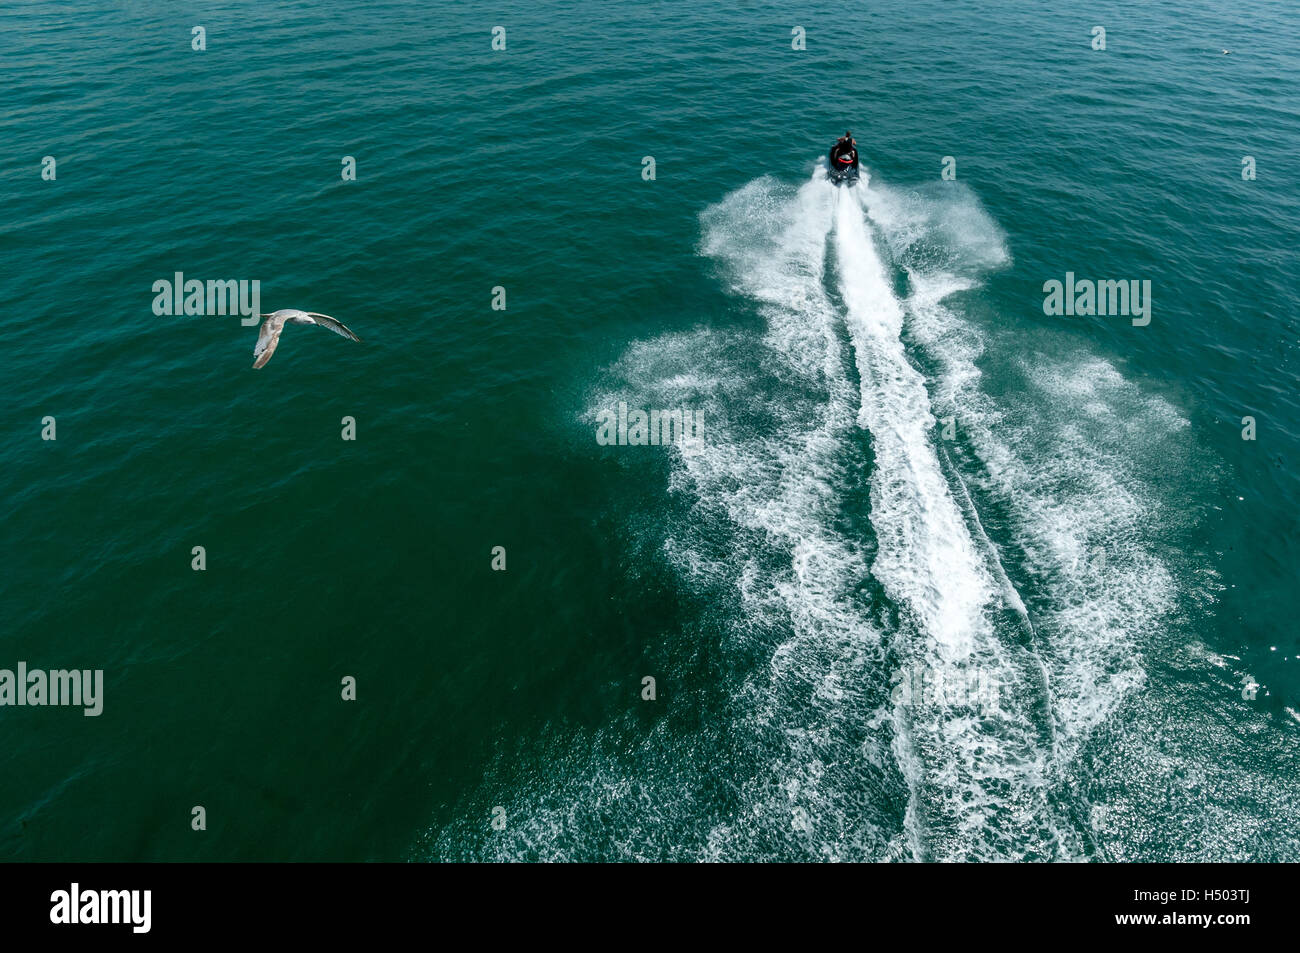 Man on a jet ski thunders over the water on the south coast of England Stock Photo